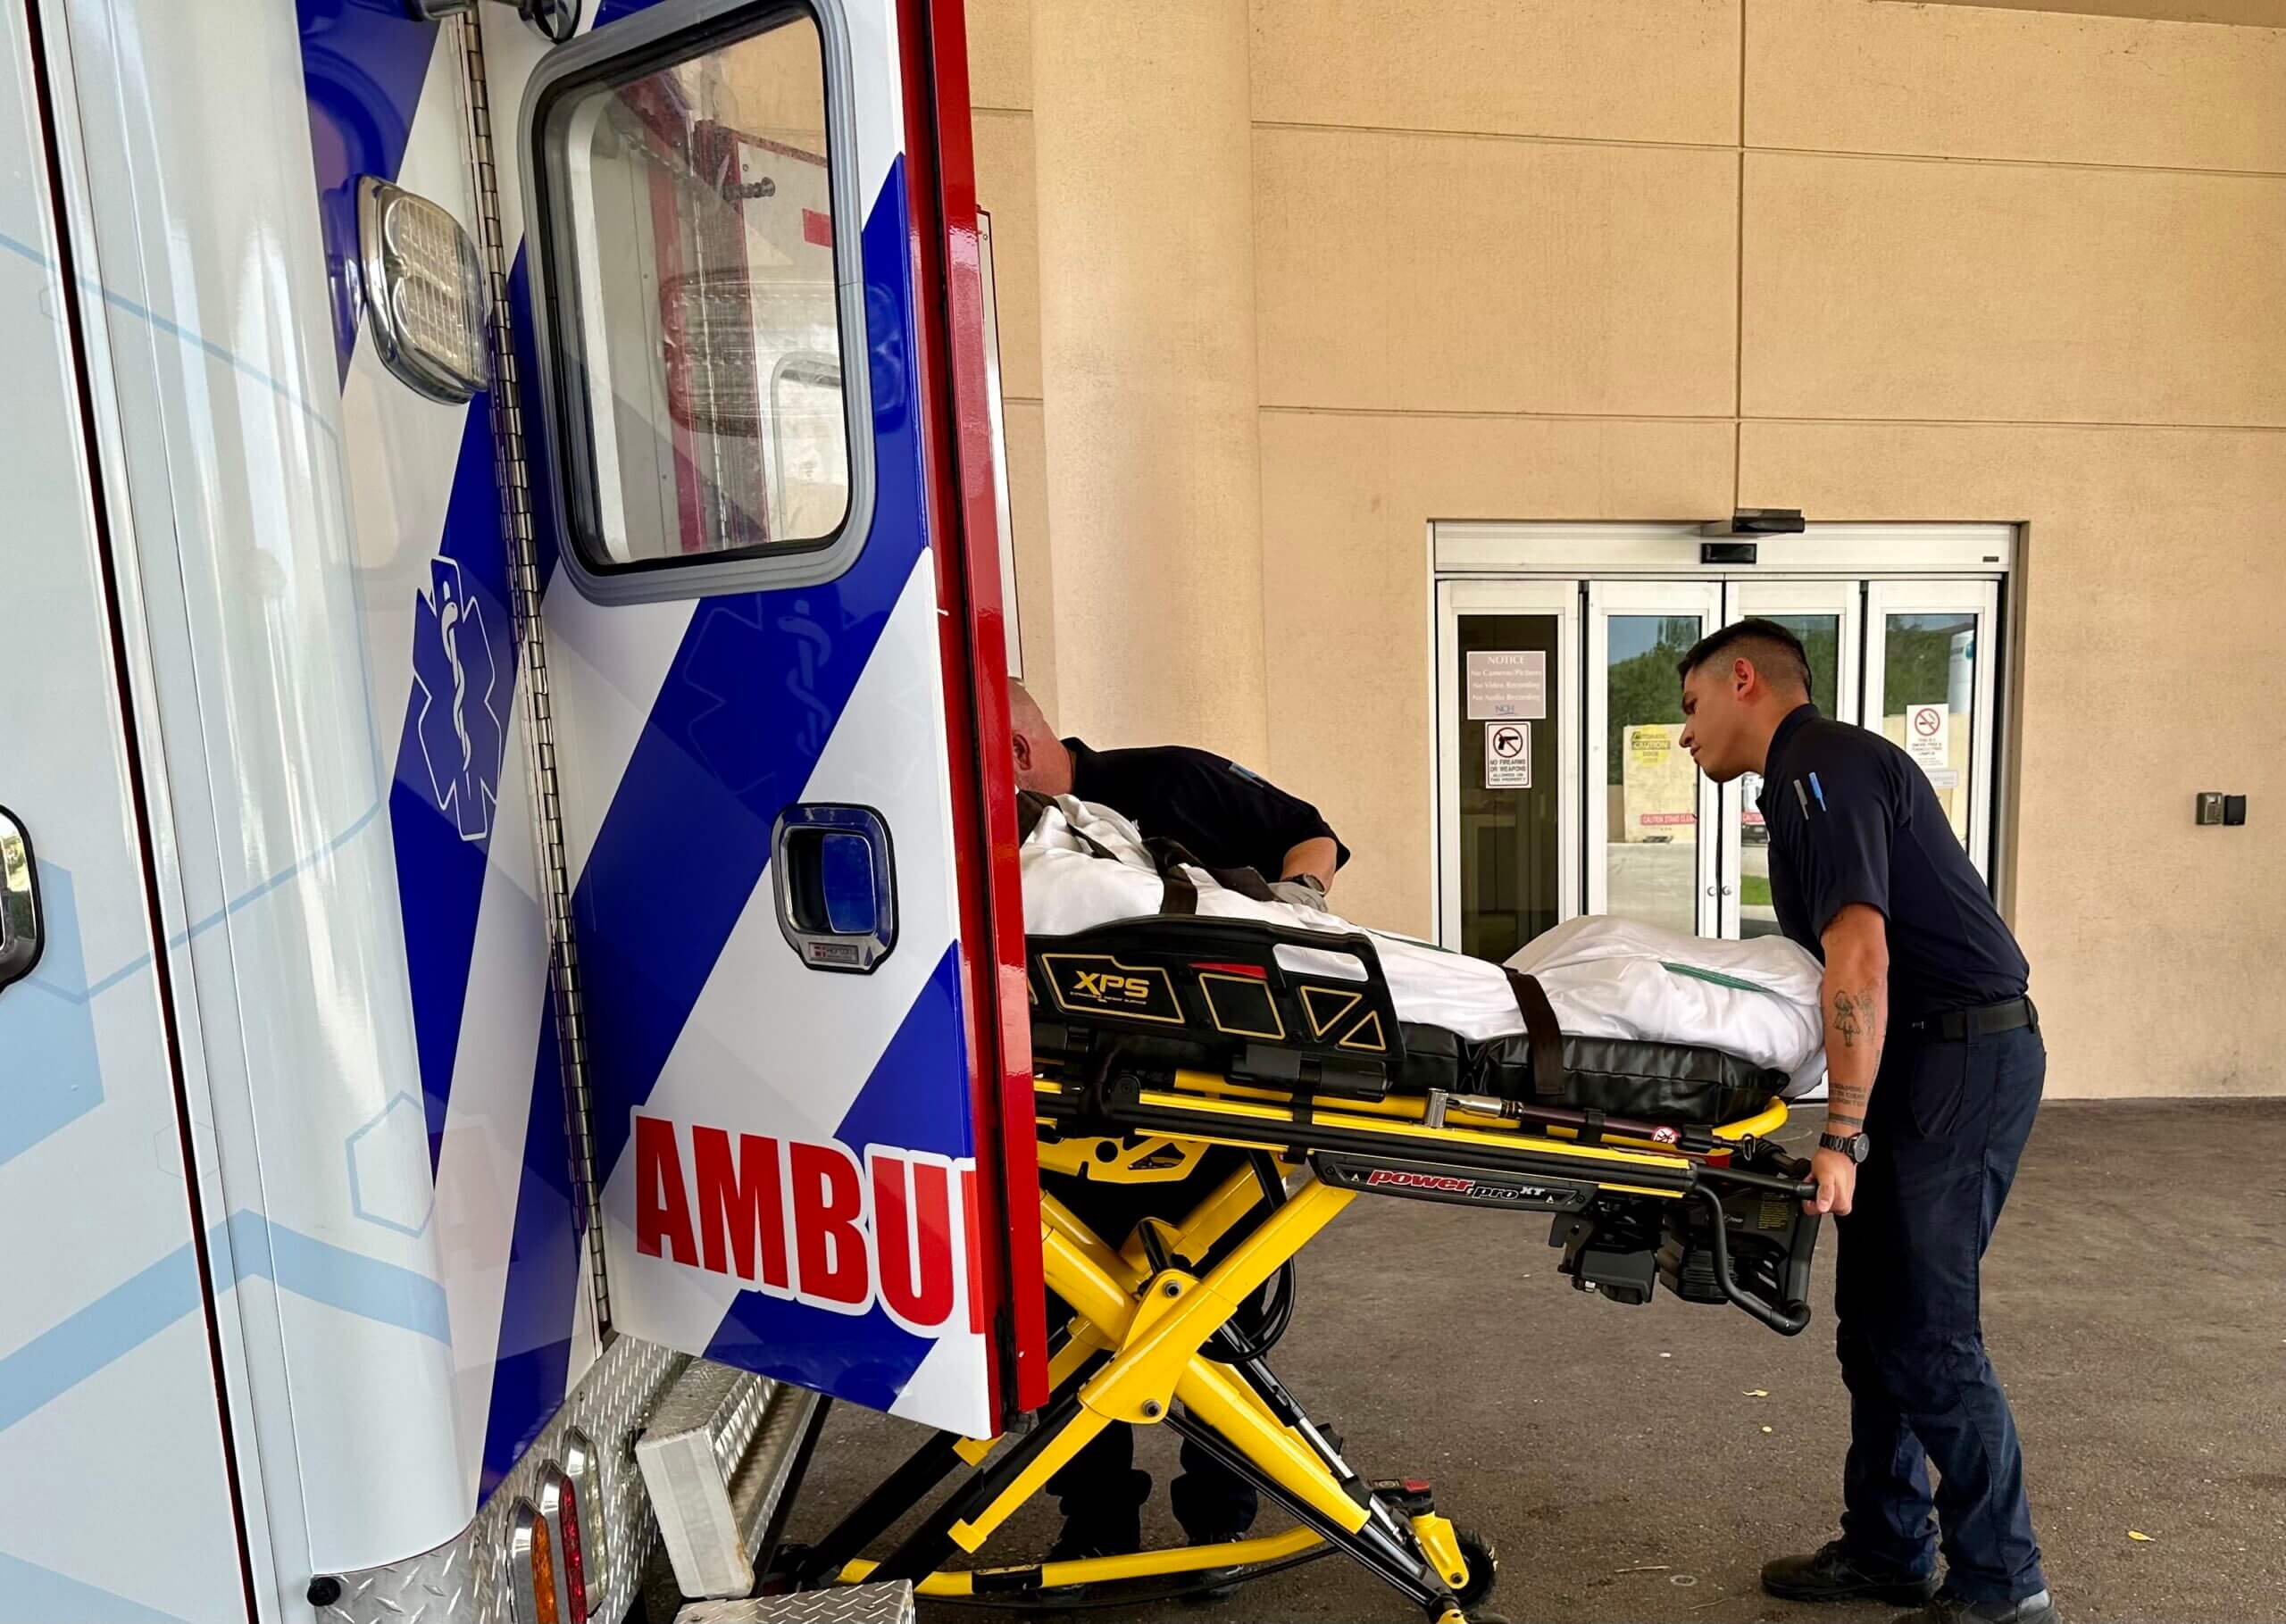 A person loading a person on a stretcher to an ambulance.